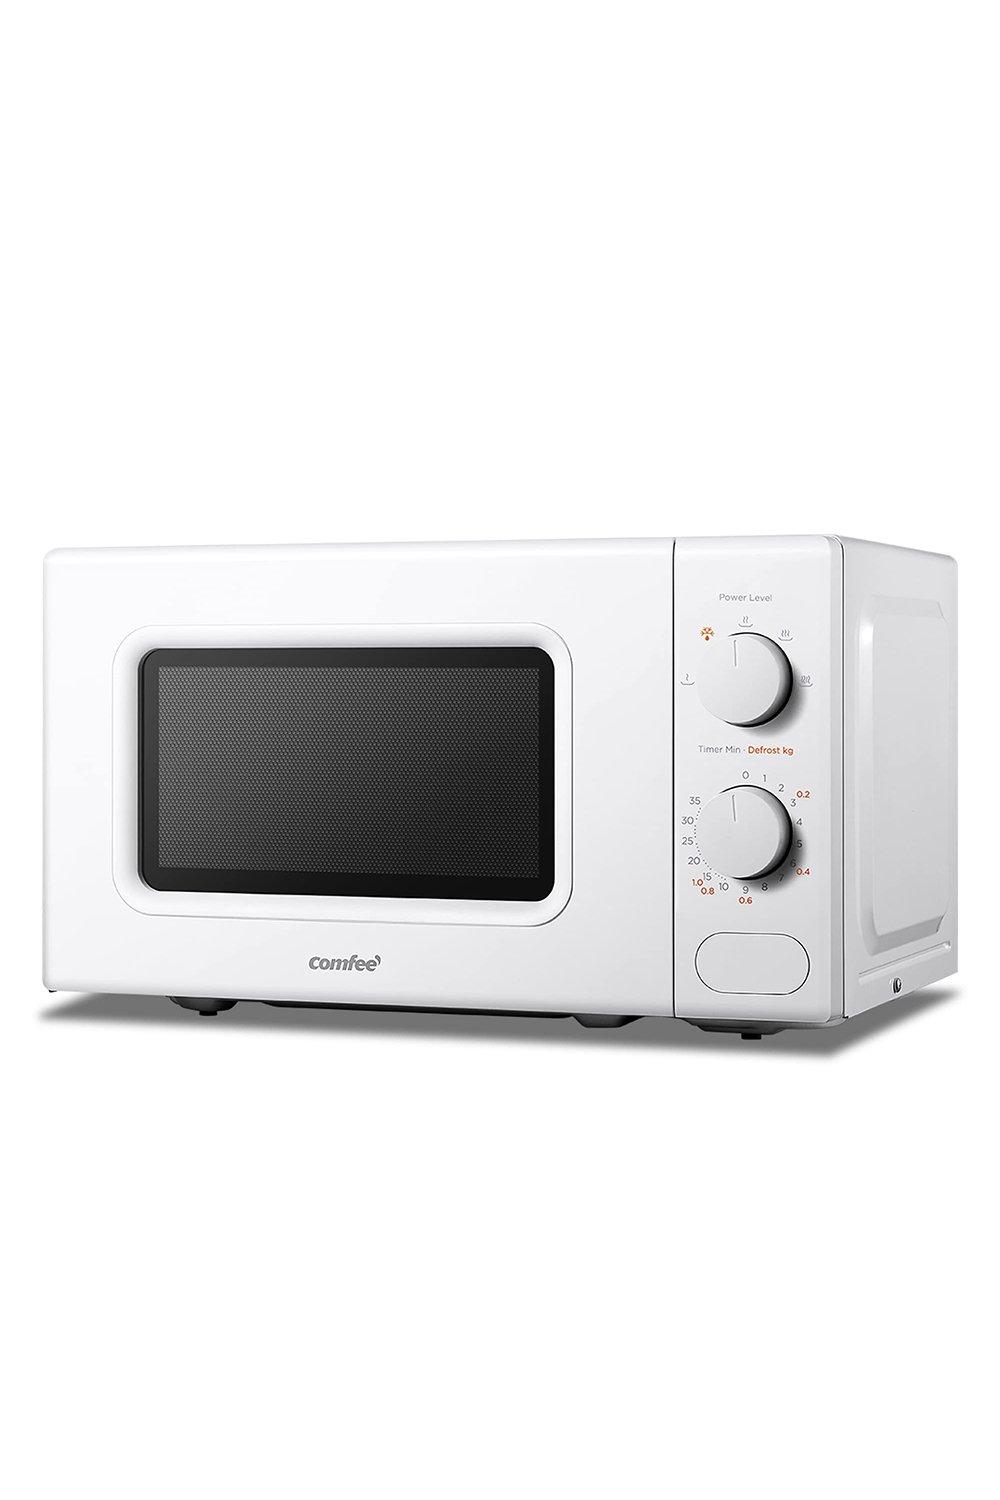 Comfee 700w 20L Microwave Oven With 5 Cooking Power Levels, Quick Defrost Function, And Kitchen Manu